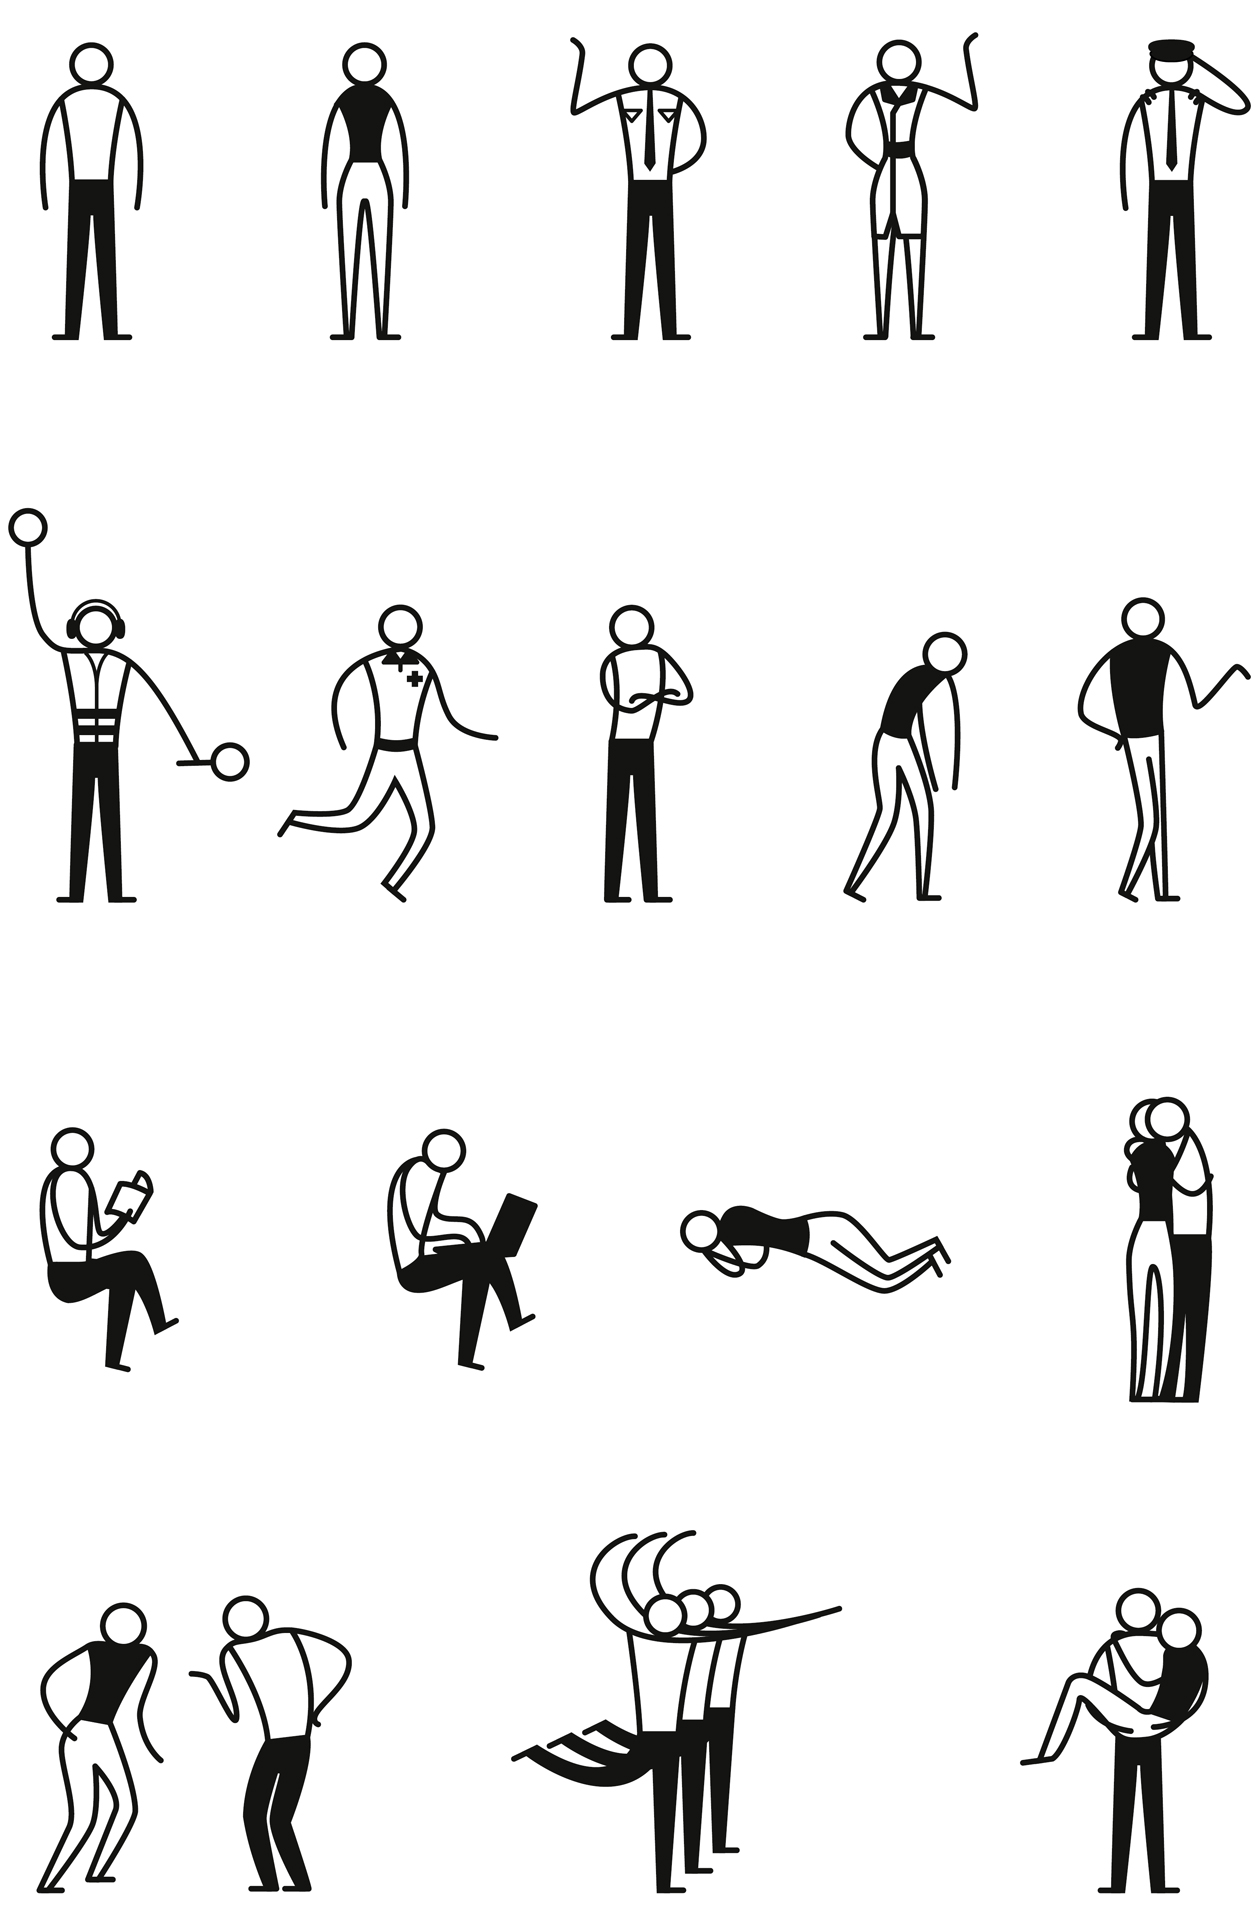 Pictogram Marie Disle Almodovar I'm so excited les amants passagers movie ecal